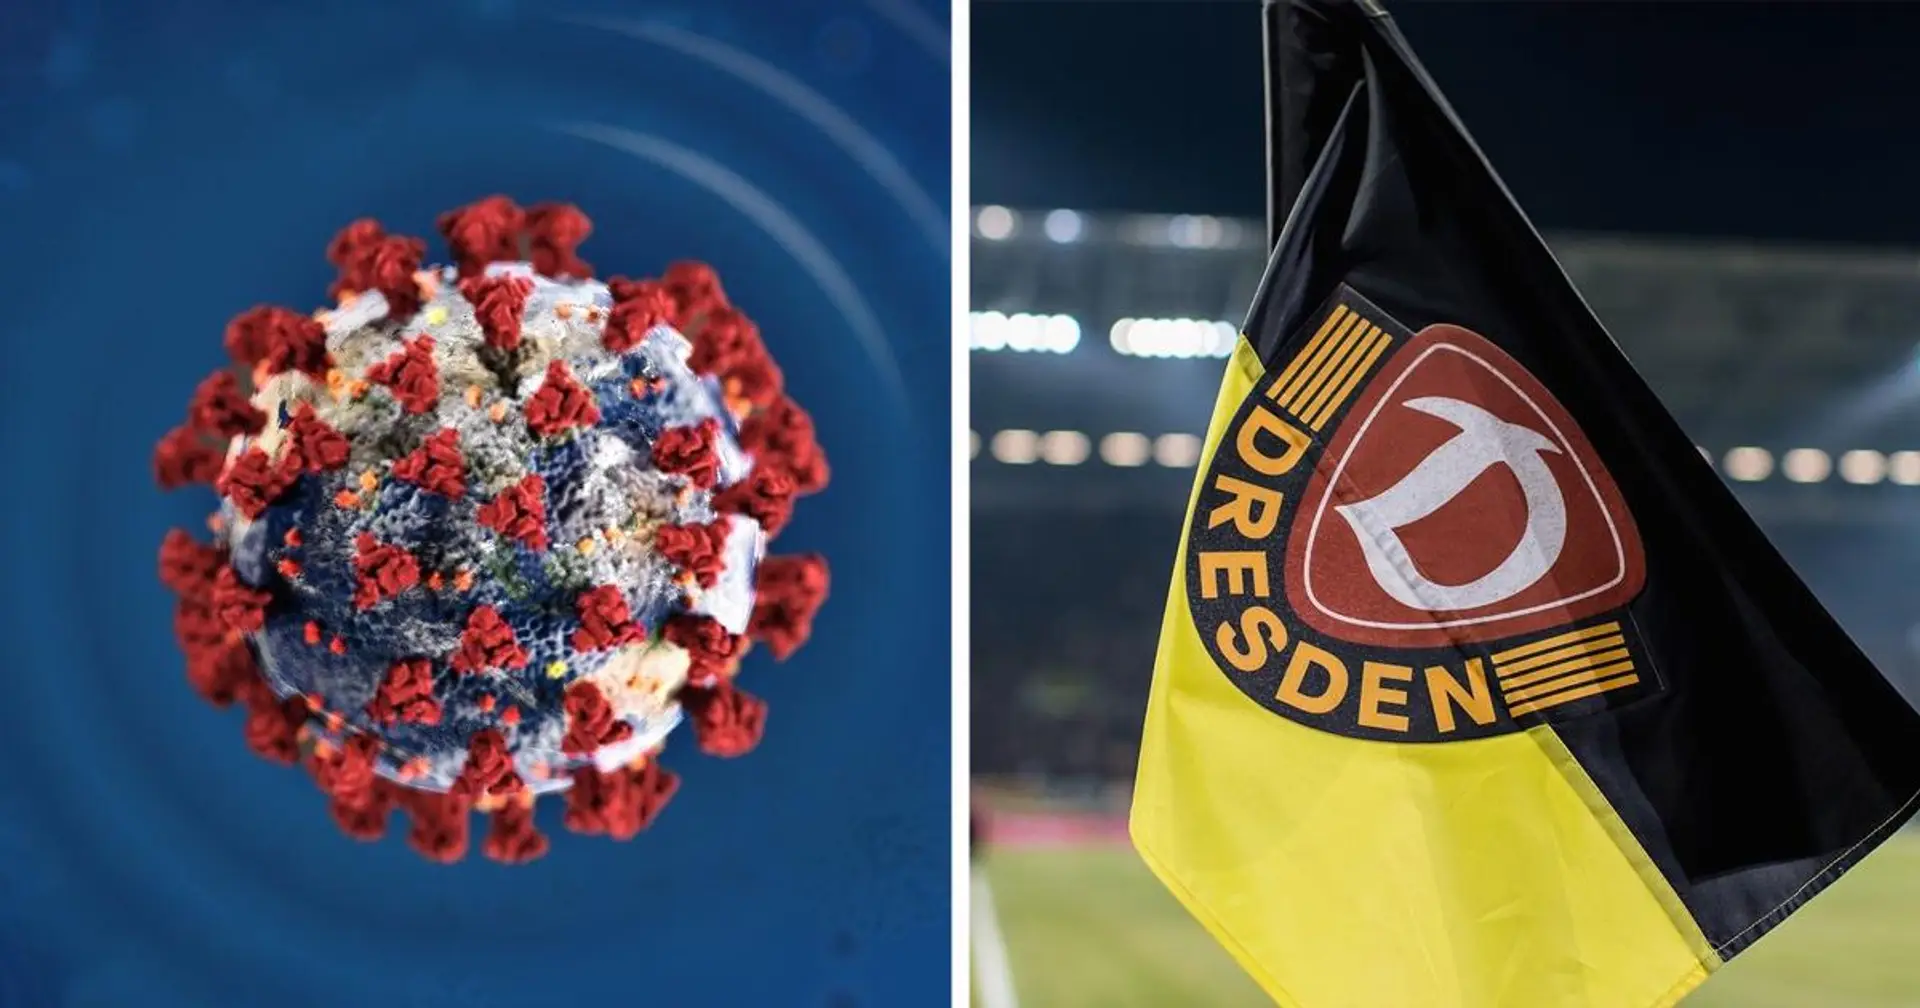 German football may be further postponed after Bundesliga 2 side forced to isolate as 2 players tested positive for coronavirus